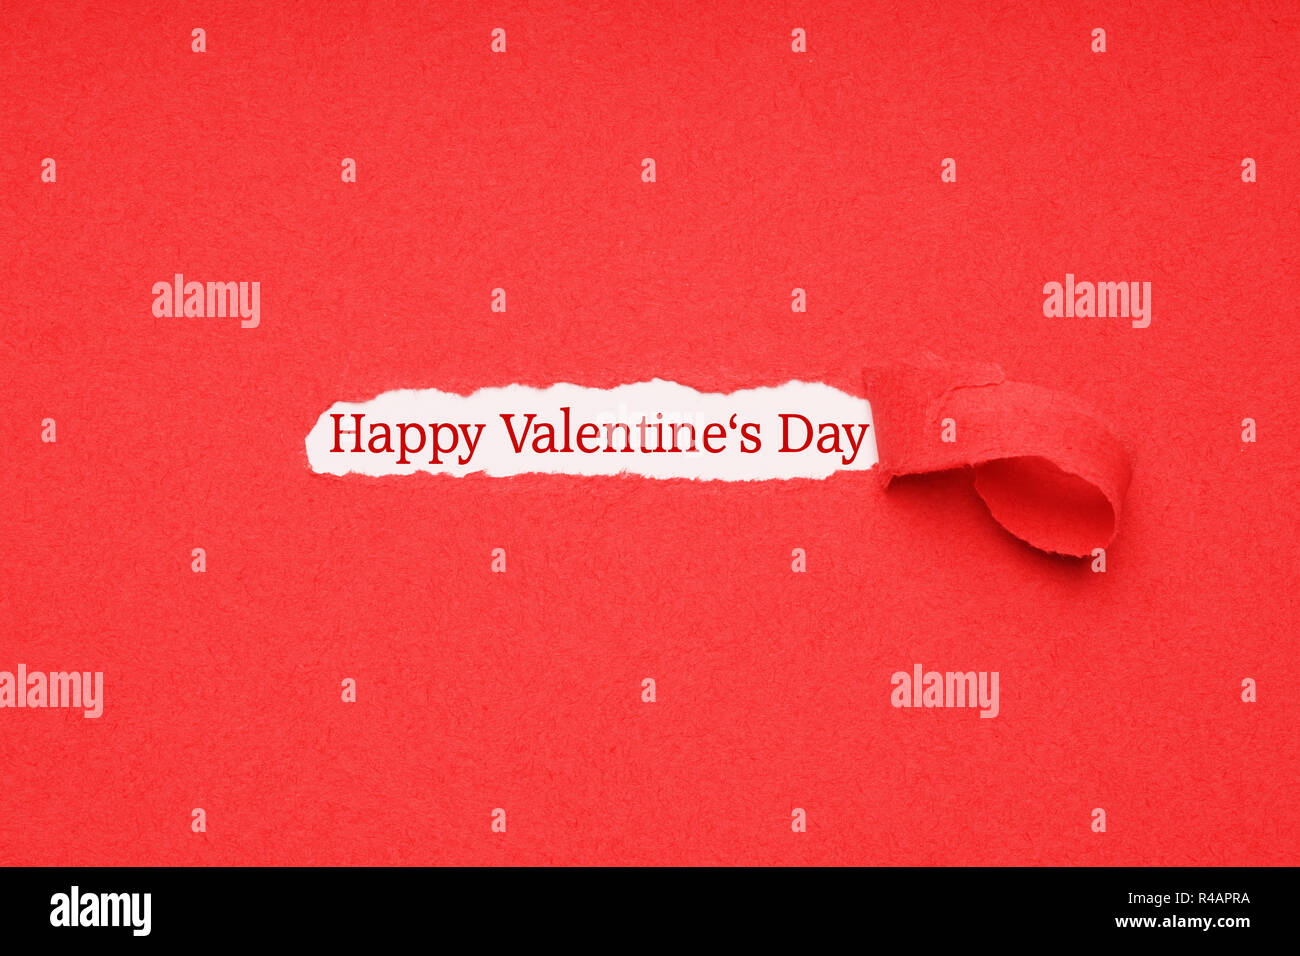 happy valentines day greeting on red background Stock Photo